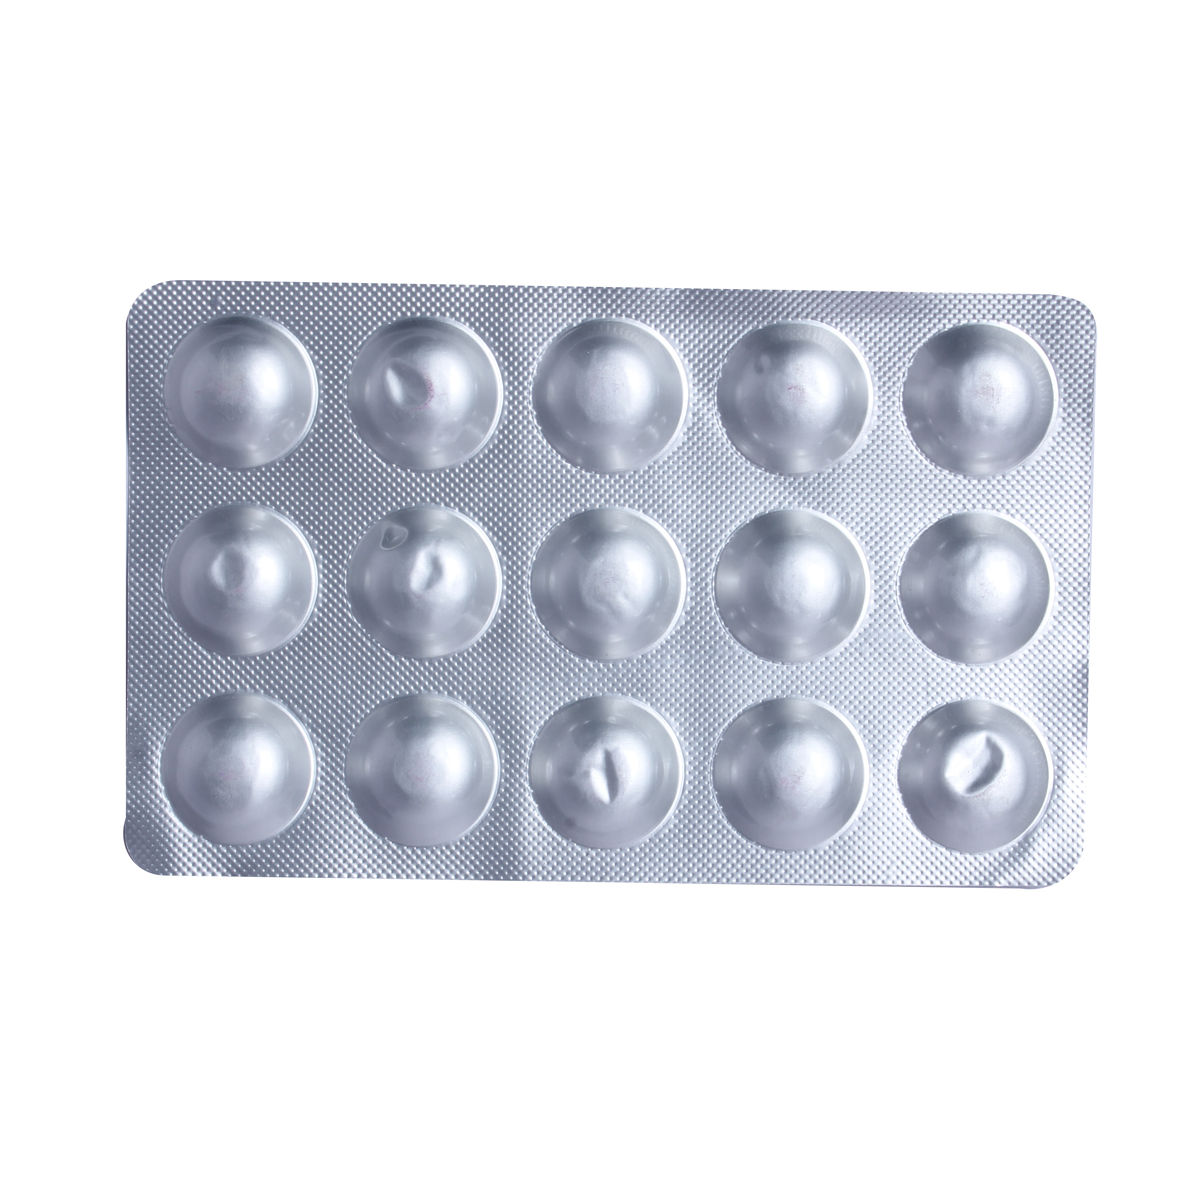 Glipy Tablet 15's, Pack of 15 TABLETS